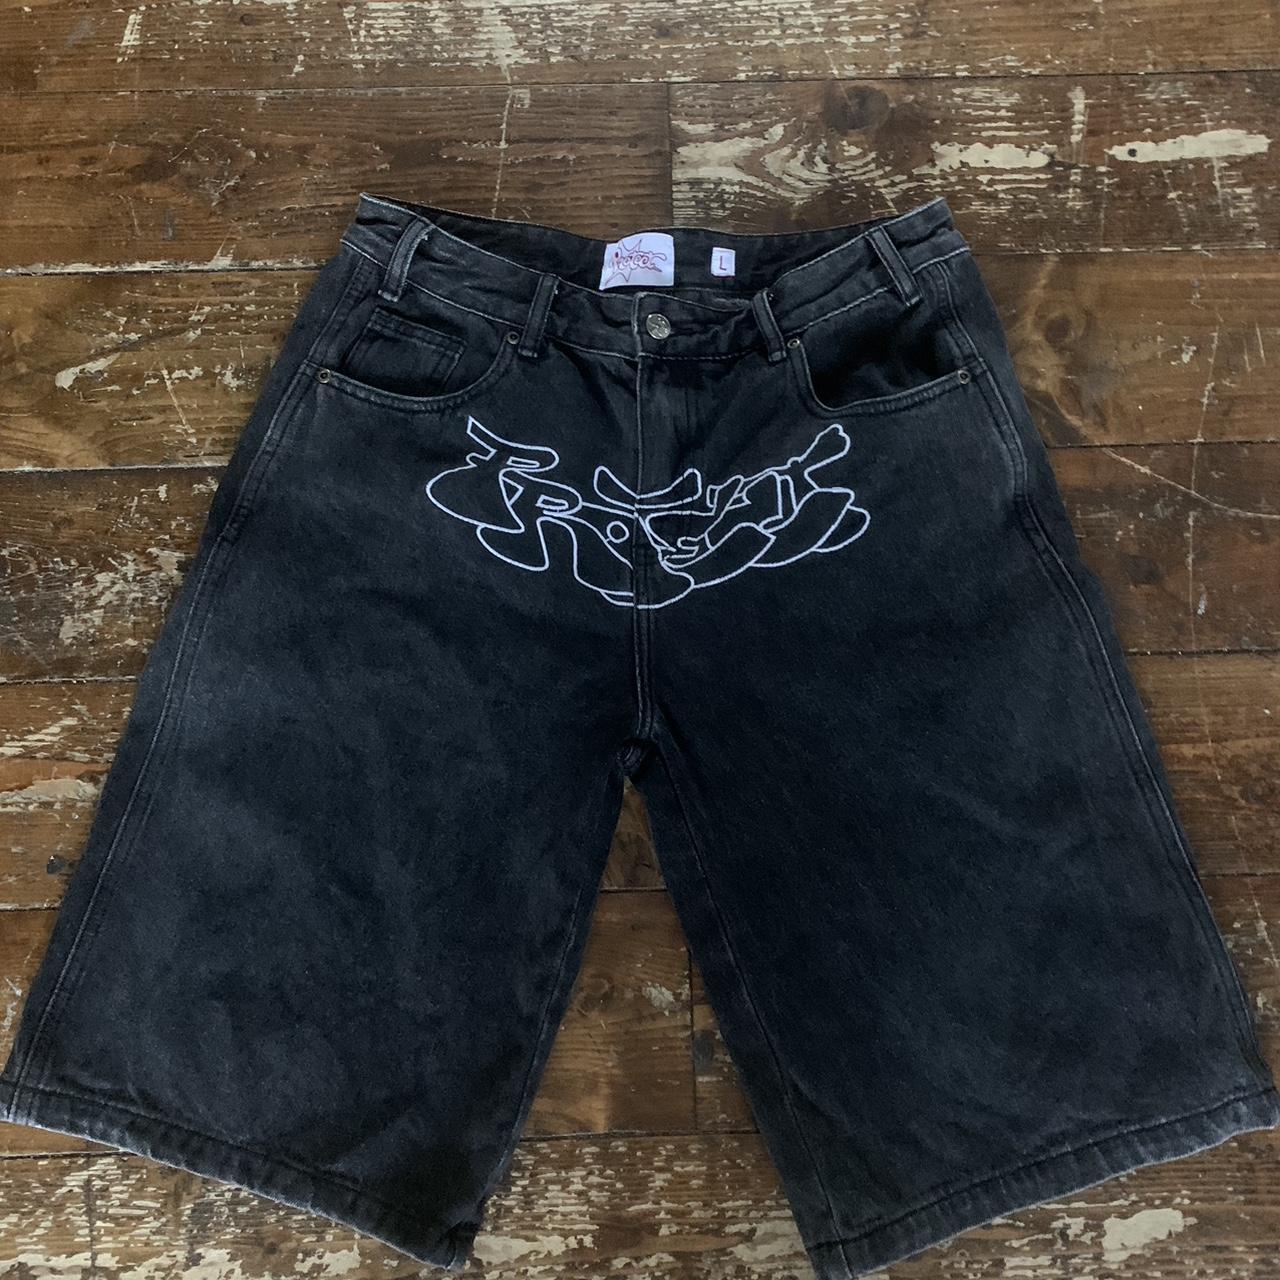 Protect ldn jorts Size Large great condition OPEN... - Depop